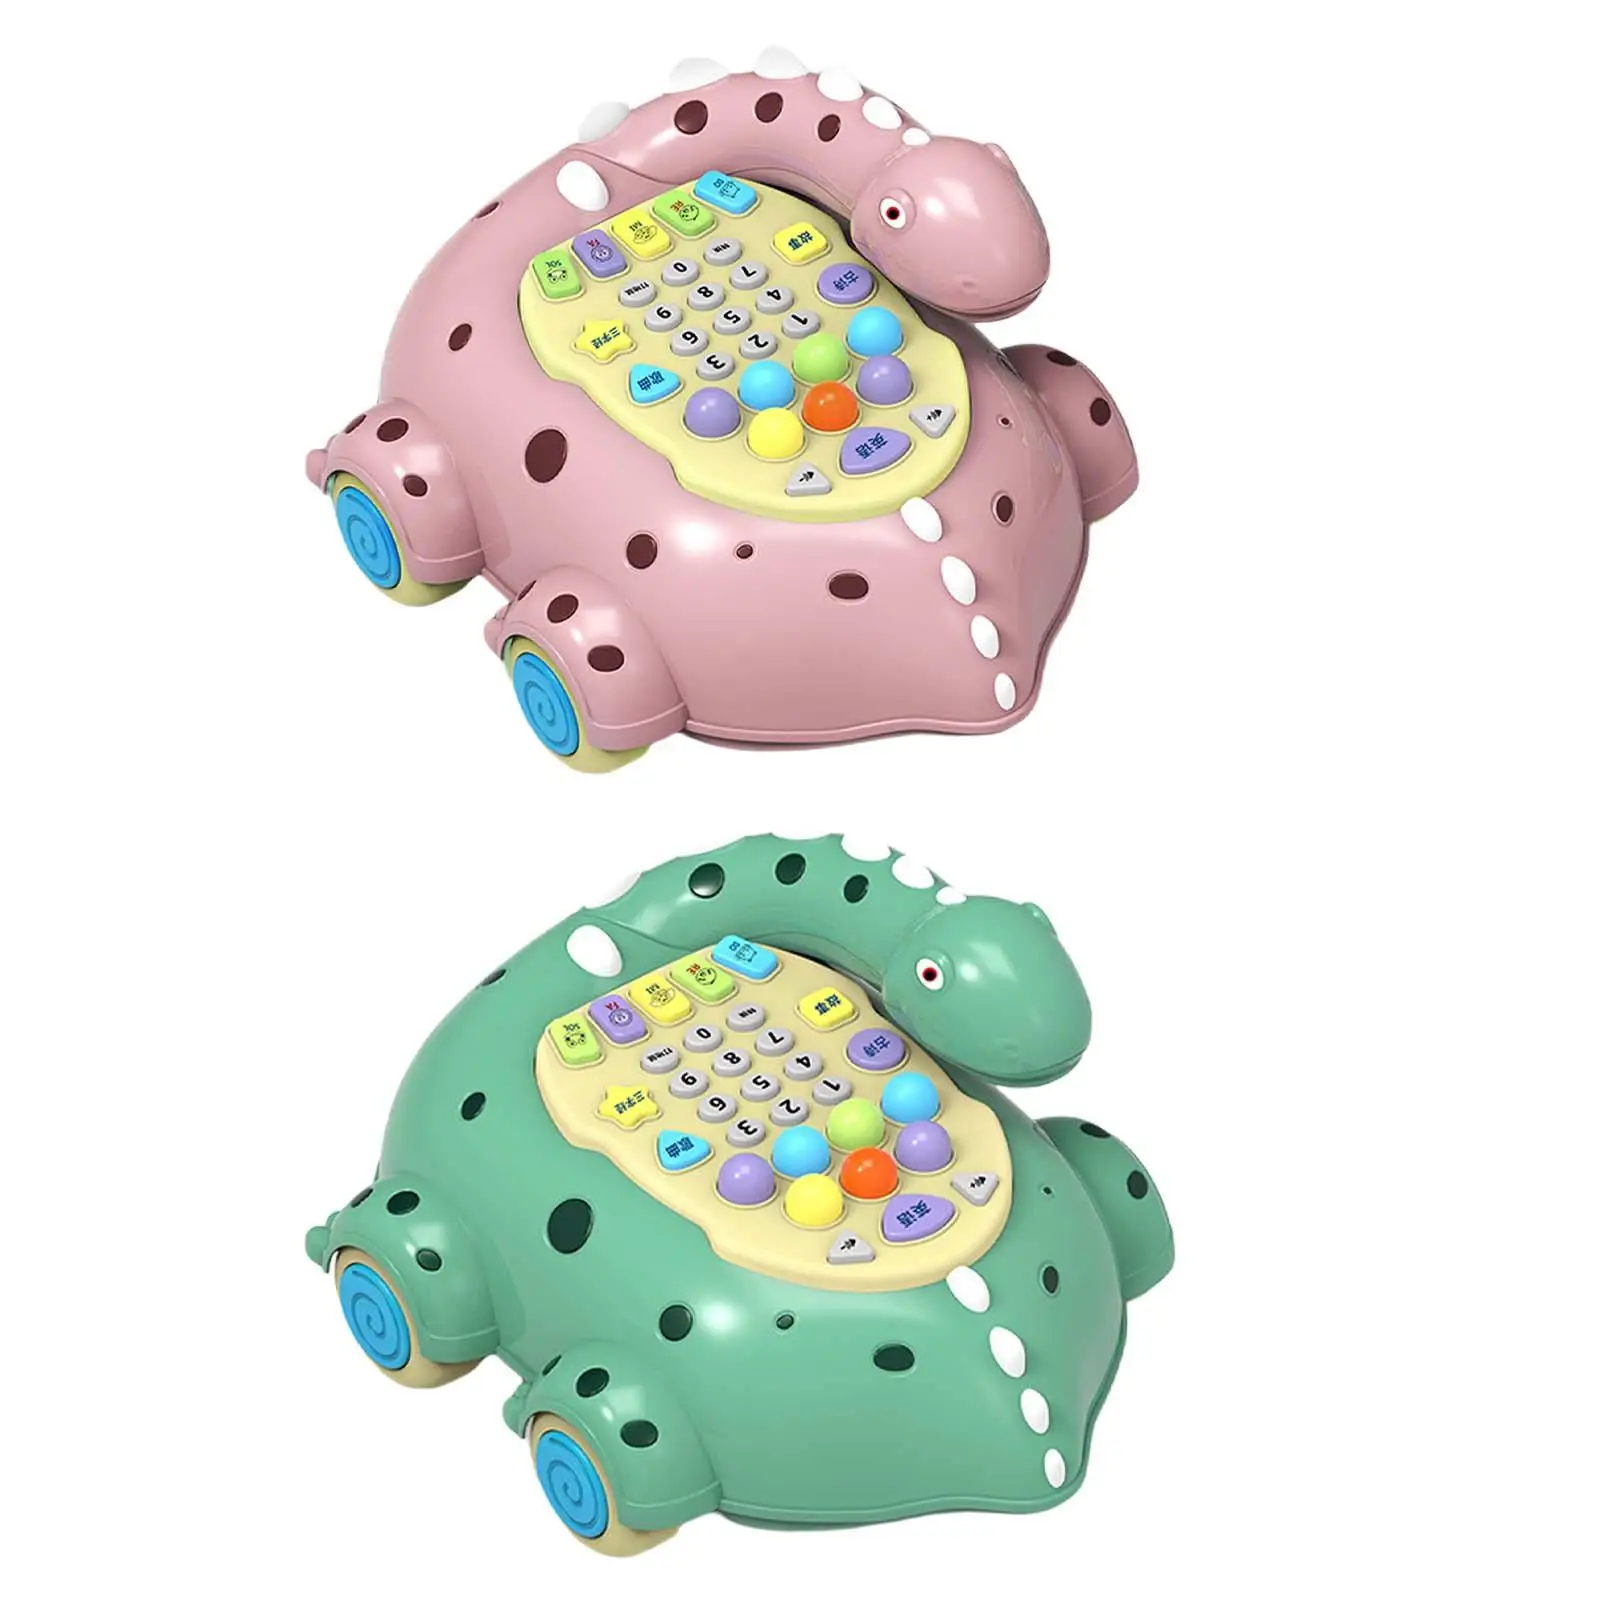 Baby Telephone Toy Pretend Play Multifunctional Pull Toys Kids Musical Telephone Toys Car for Development Sensory Gift Learning